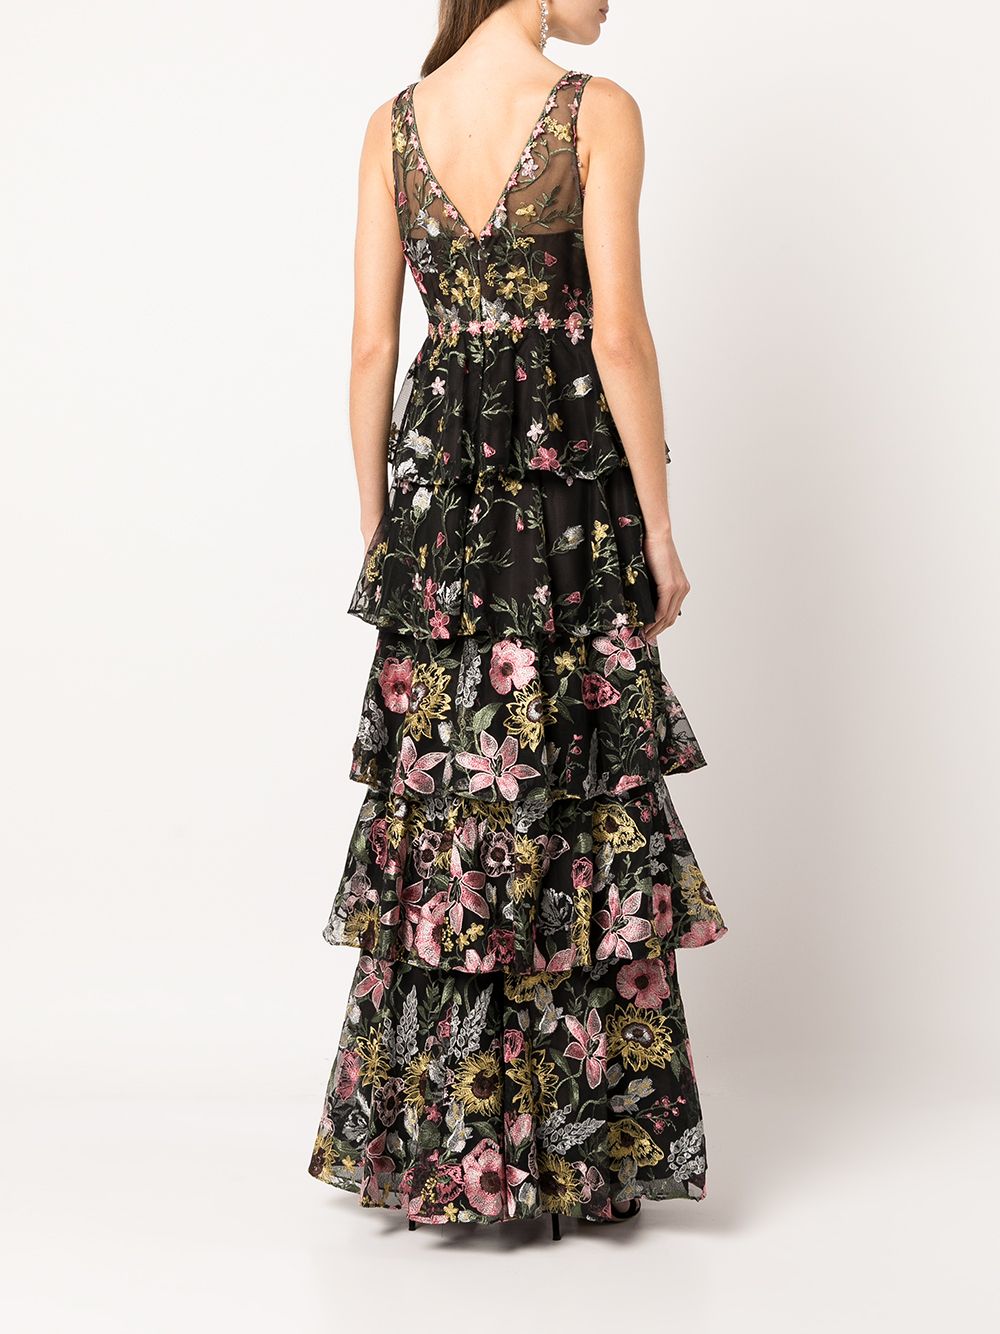 Marchesa Notte floral-embroidered Sleeveless Gown - Farfetch